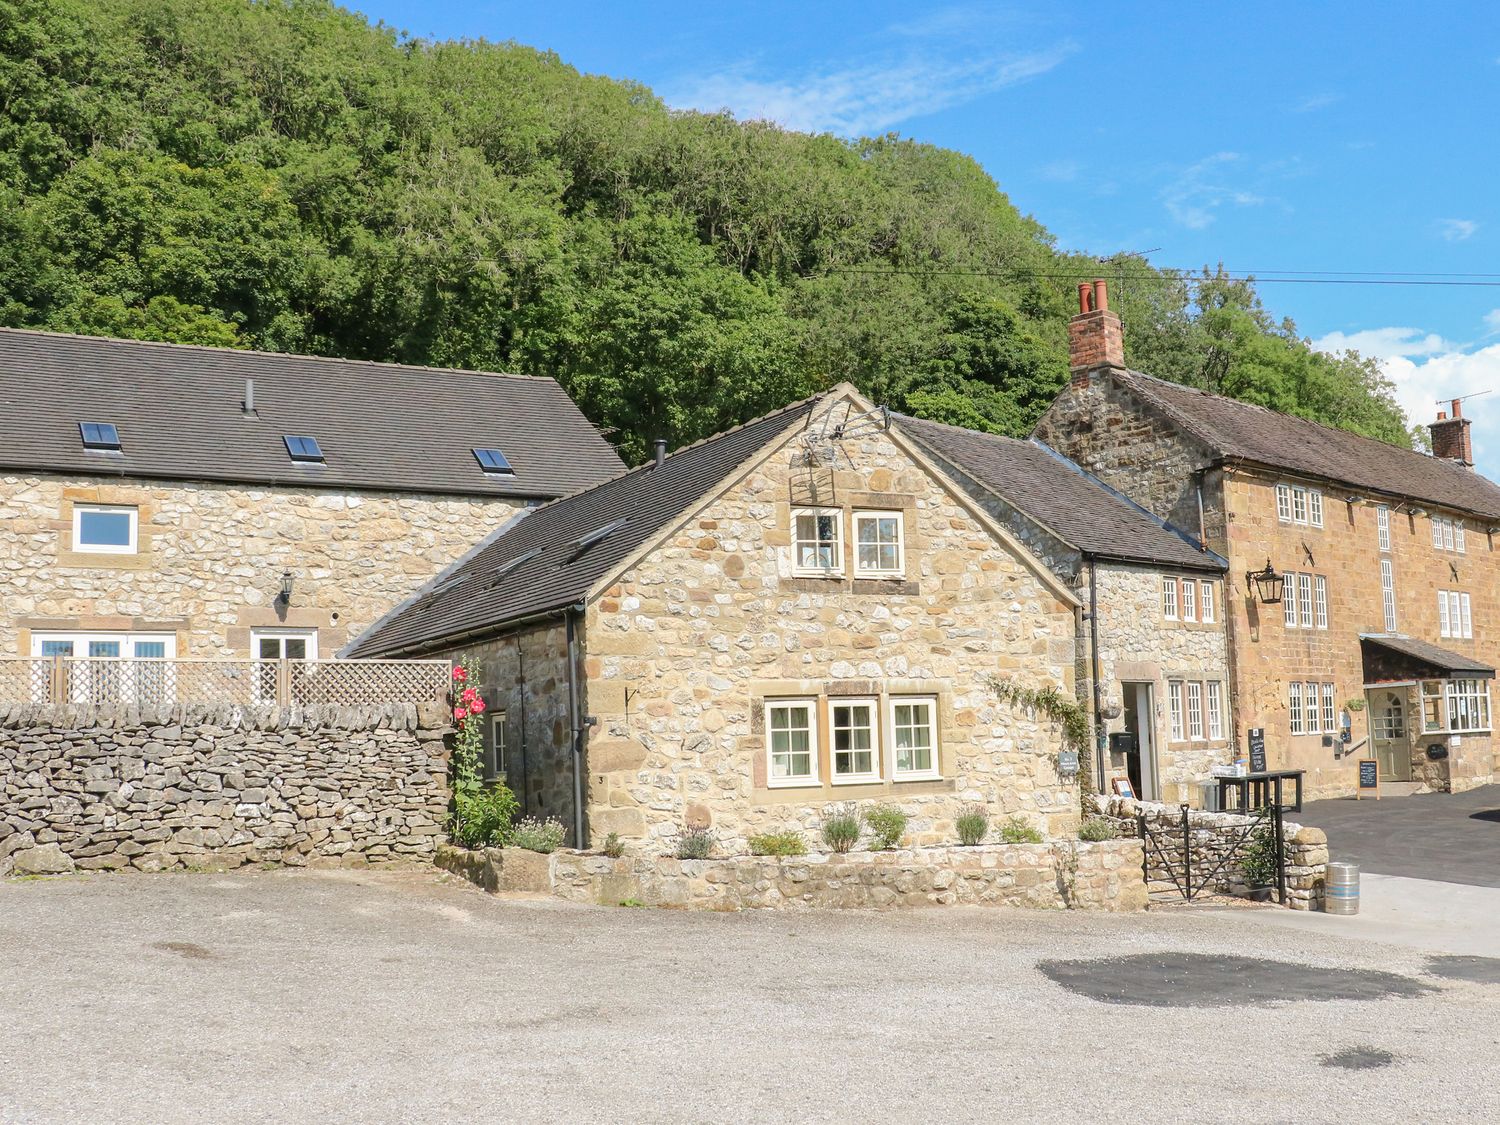 2 Miners Arms Cottages - Peak District - 1050919 - photo 1